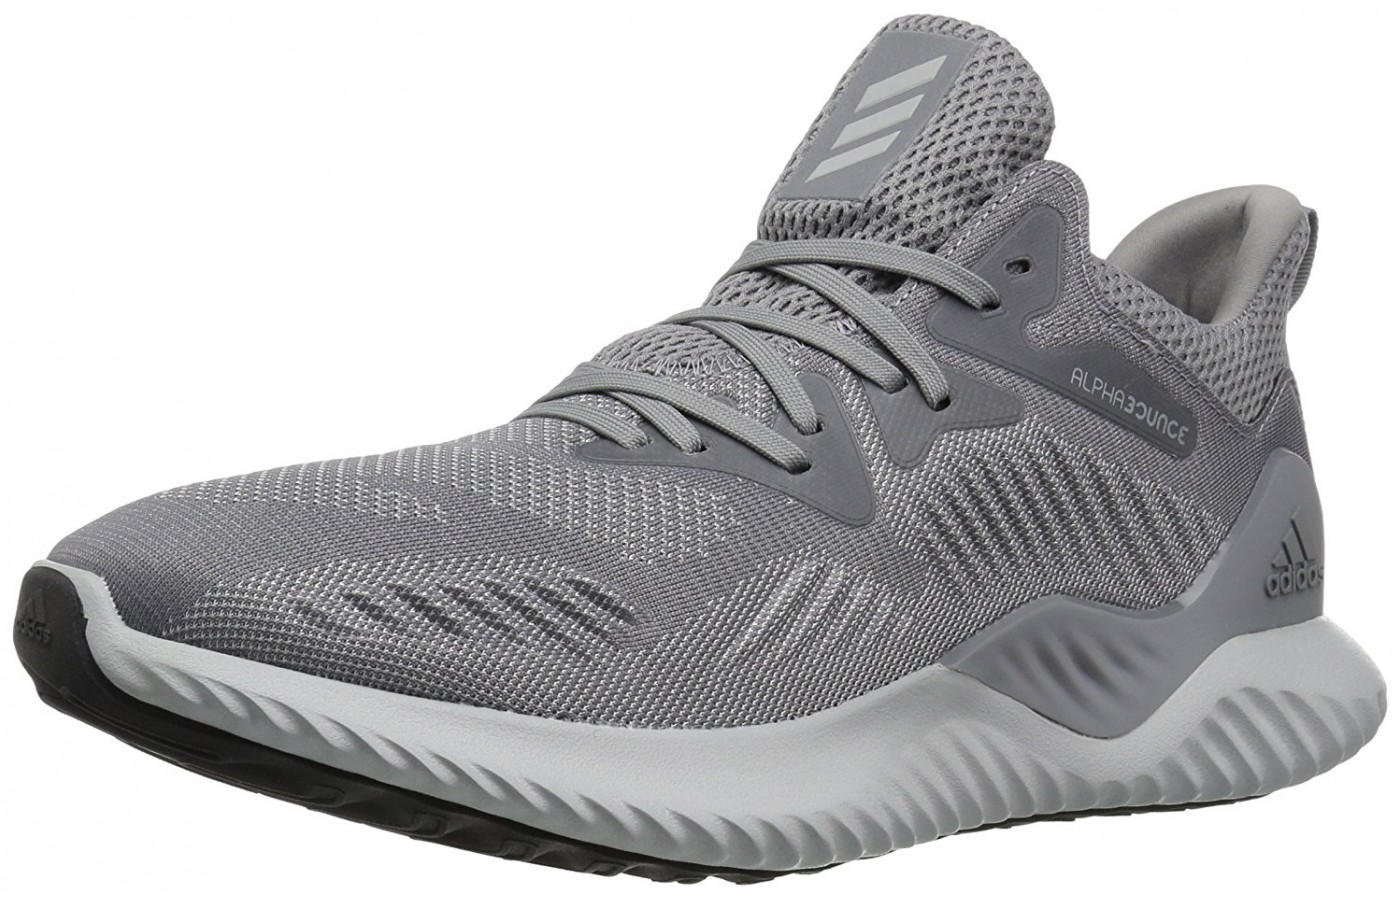 Adidas Alphabounce Beyond Tested for Performance in 2021 | WalkJogRun